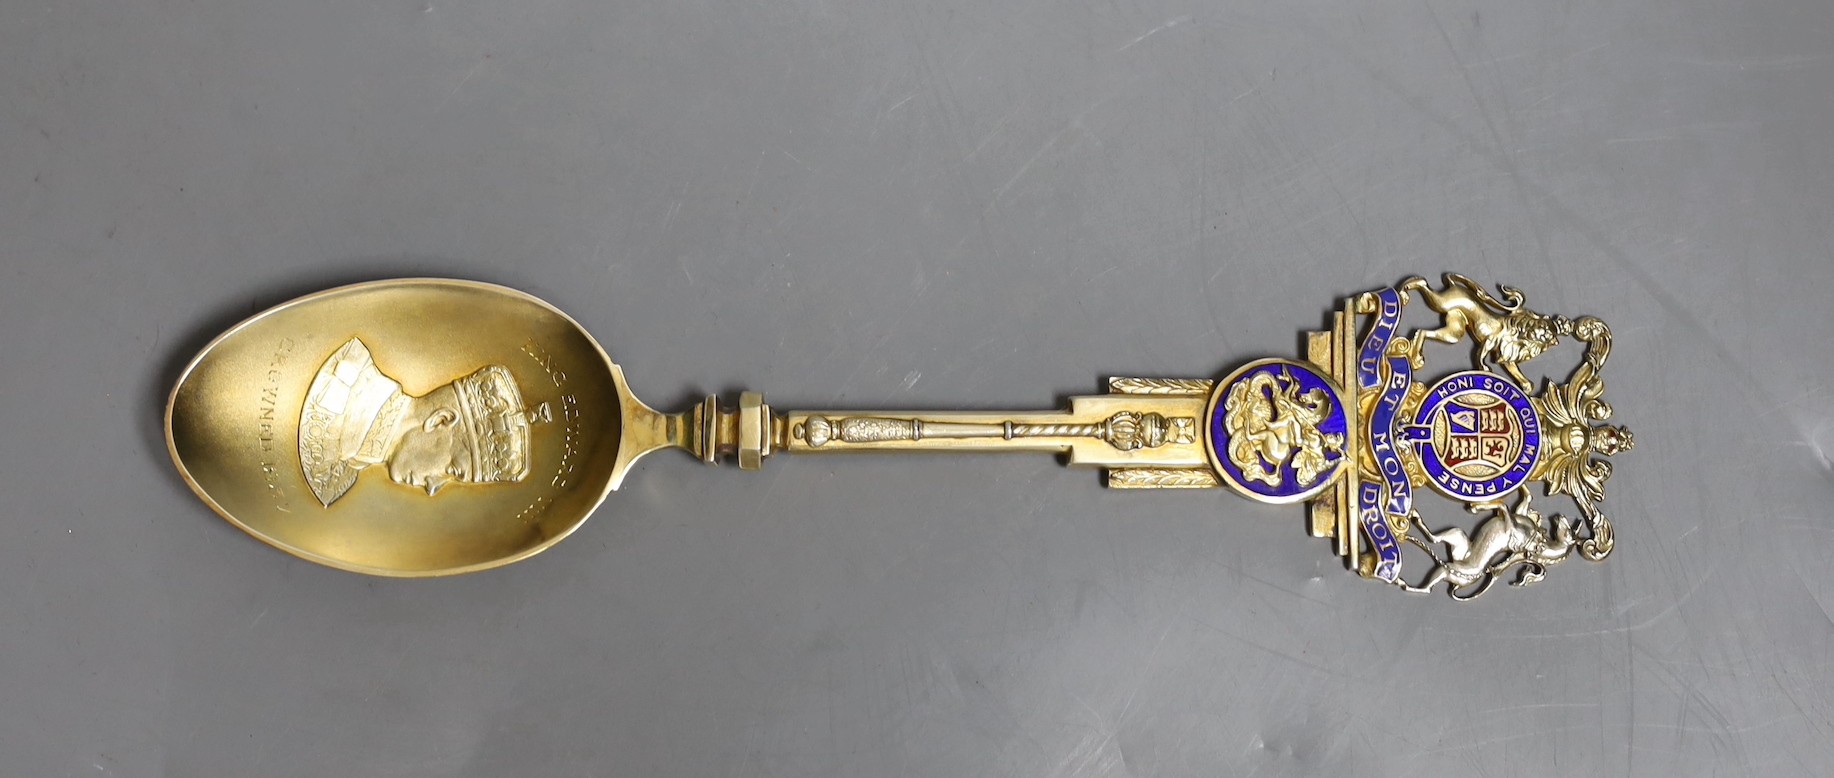 A cased Edward VIII Coronation silver gilt and enamel spoon, the bowl embossed with the bust of Edward VIII, Turner & Simson Ltd, Birmingham, 1936, 20.9cm, gross weight 98 grams.